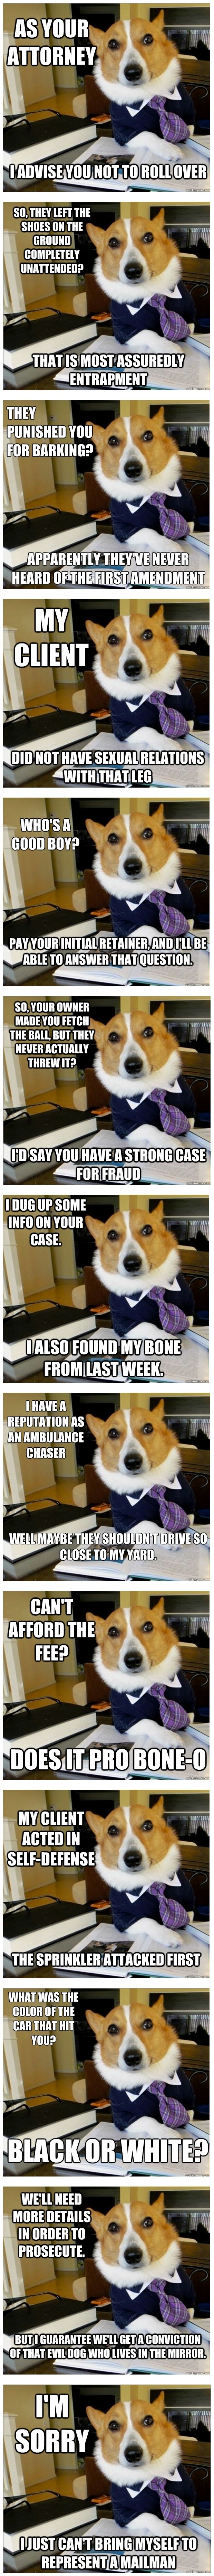 Best of Lawyer Dog